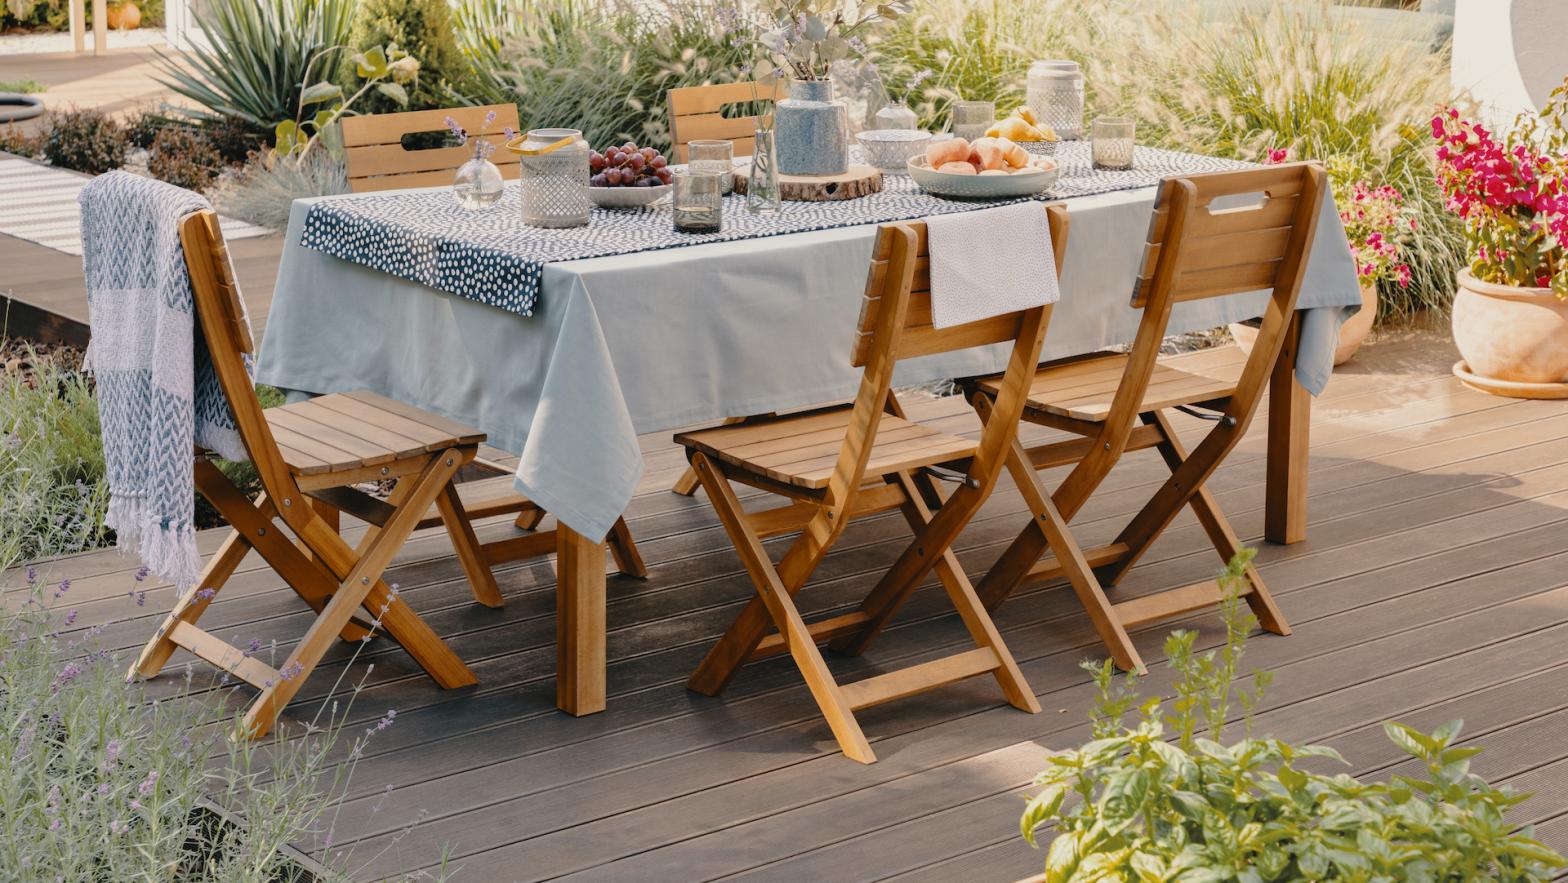 7 Ways to Spruce Up Your Outdoor Dining Space